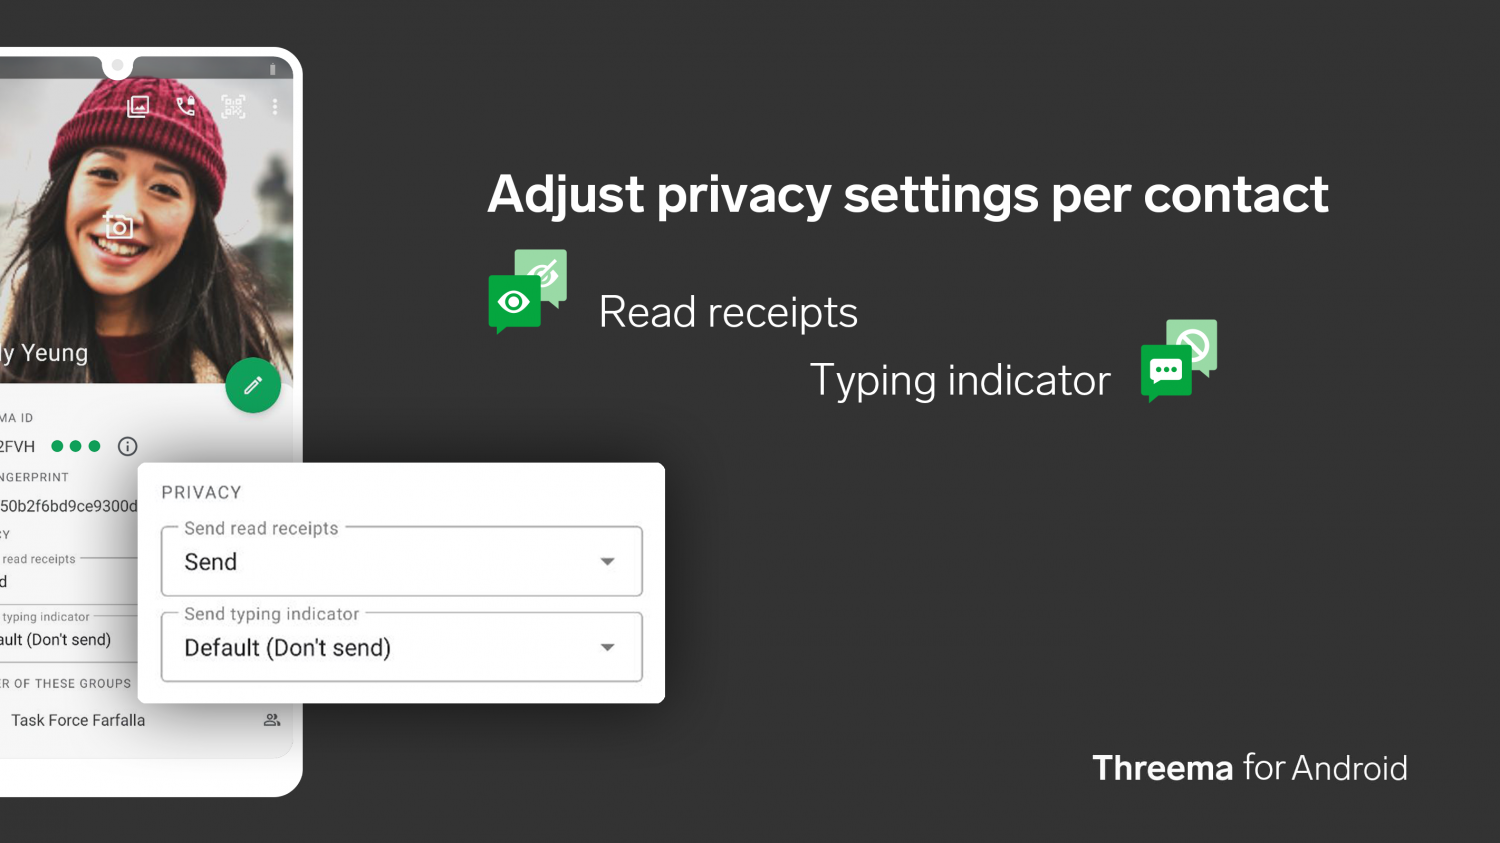 Threema for Android Introduces Contact-Specific Privacy Settings